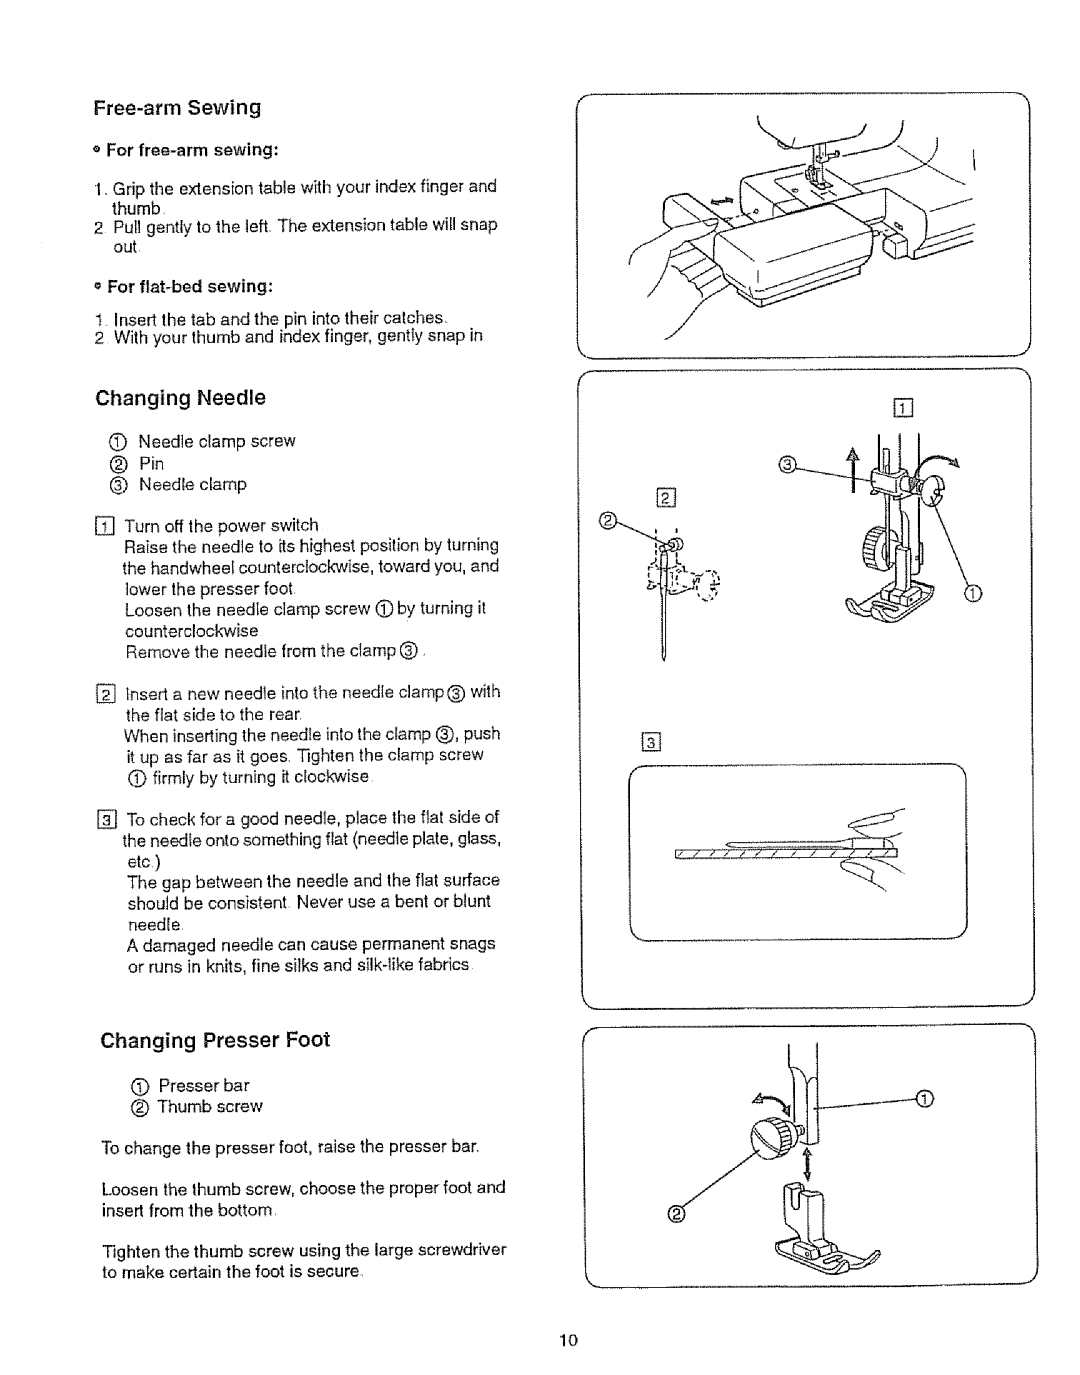 Sears 385.12912, 385.12916 owner manual Changing Needle, Changing Presser Foot, Free-arm Sewing, For free-arm sewing 